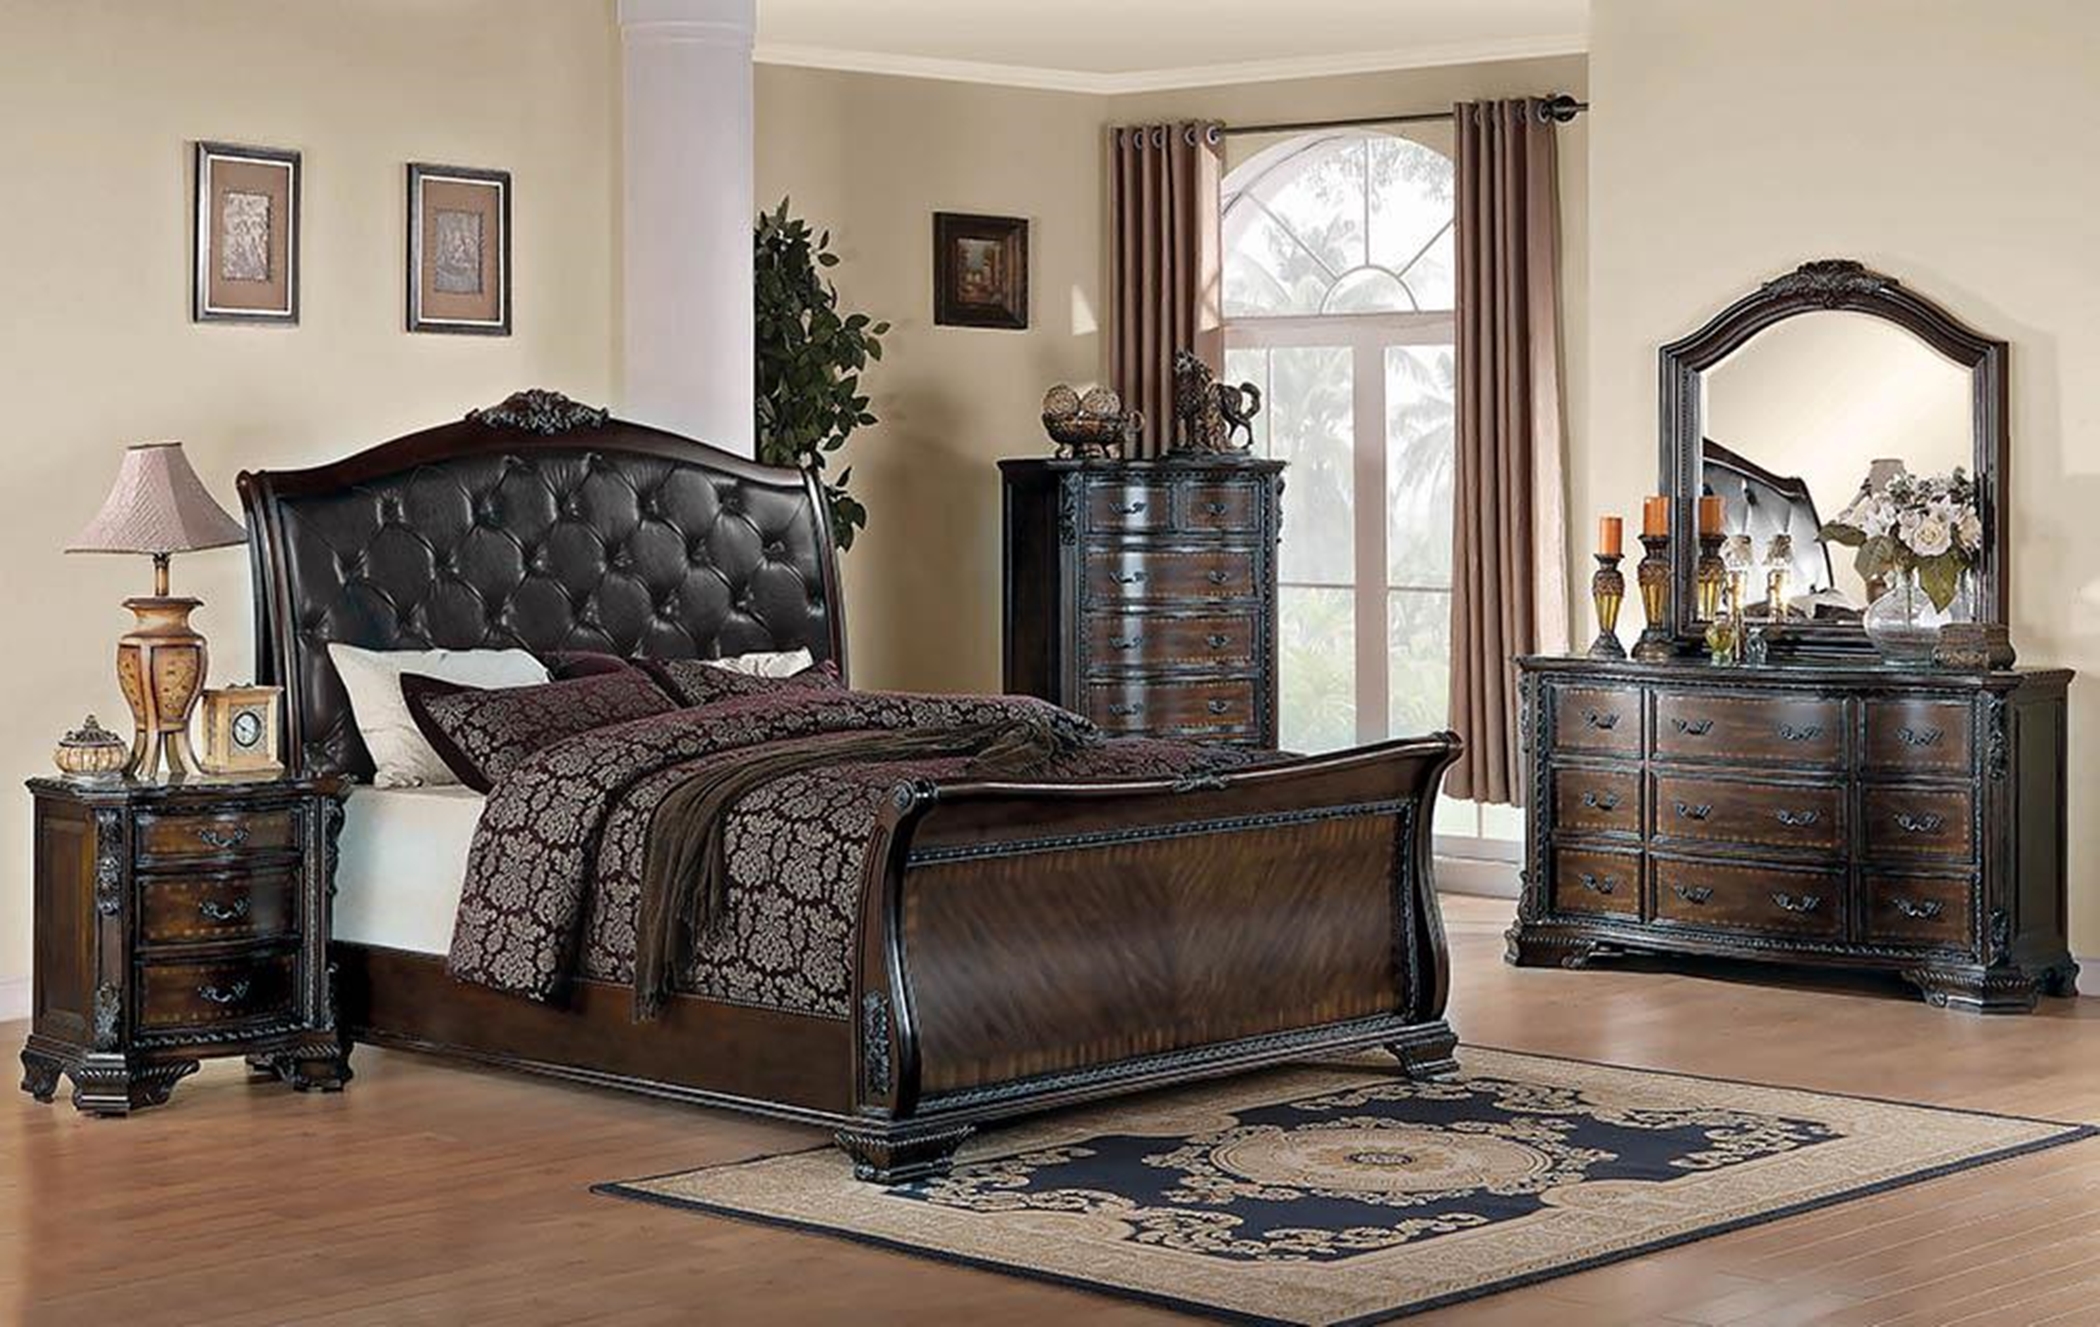 Maddison Brown Cherry Queen Bed - Click Image to Close